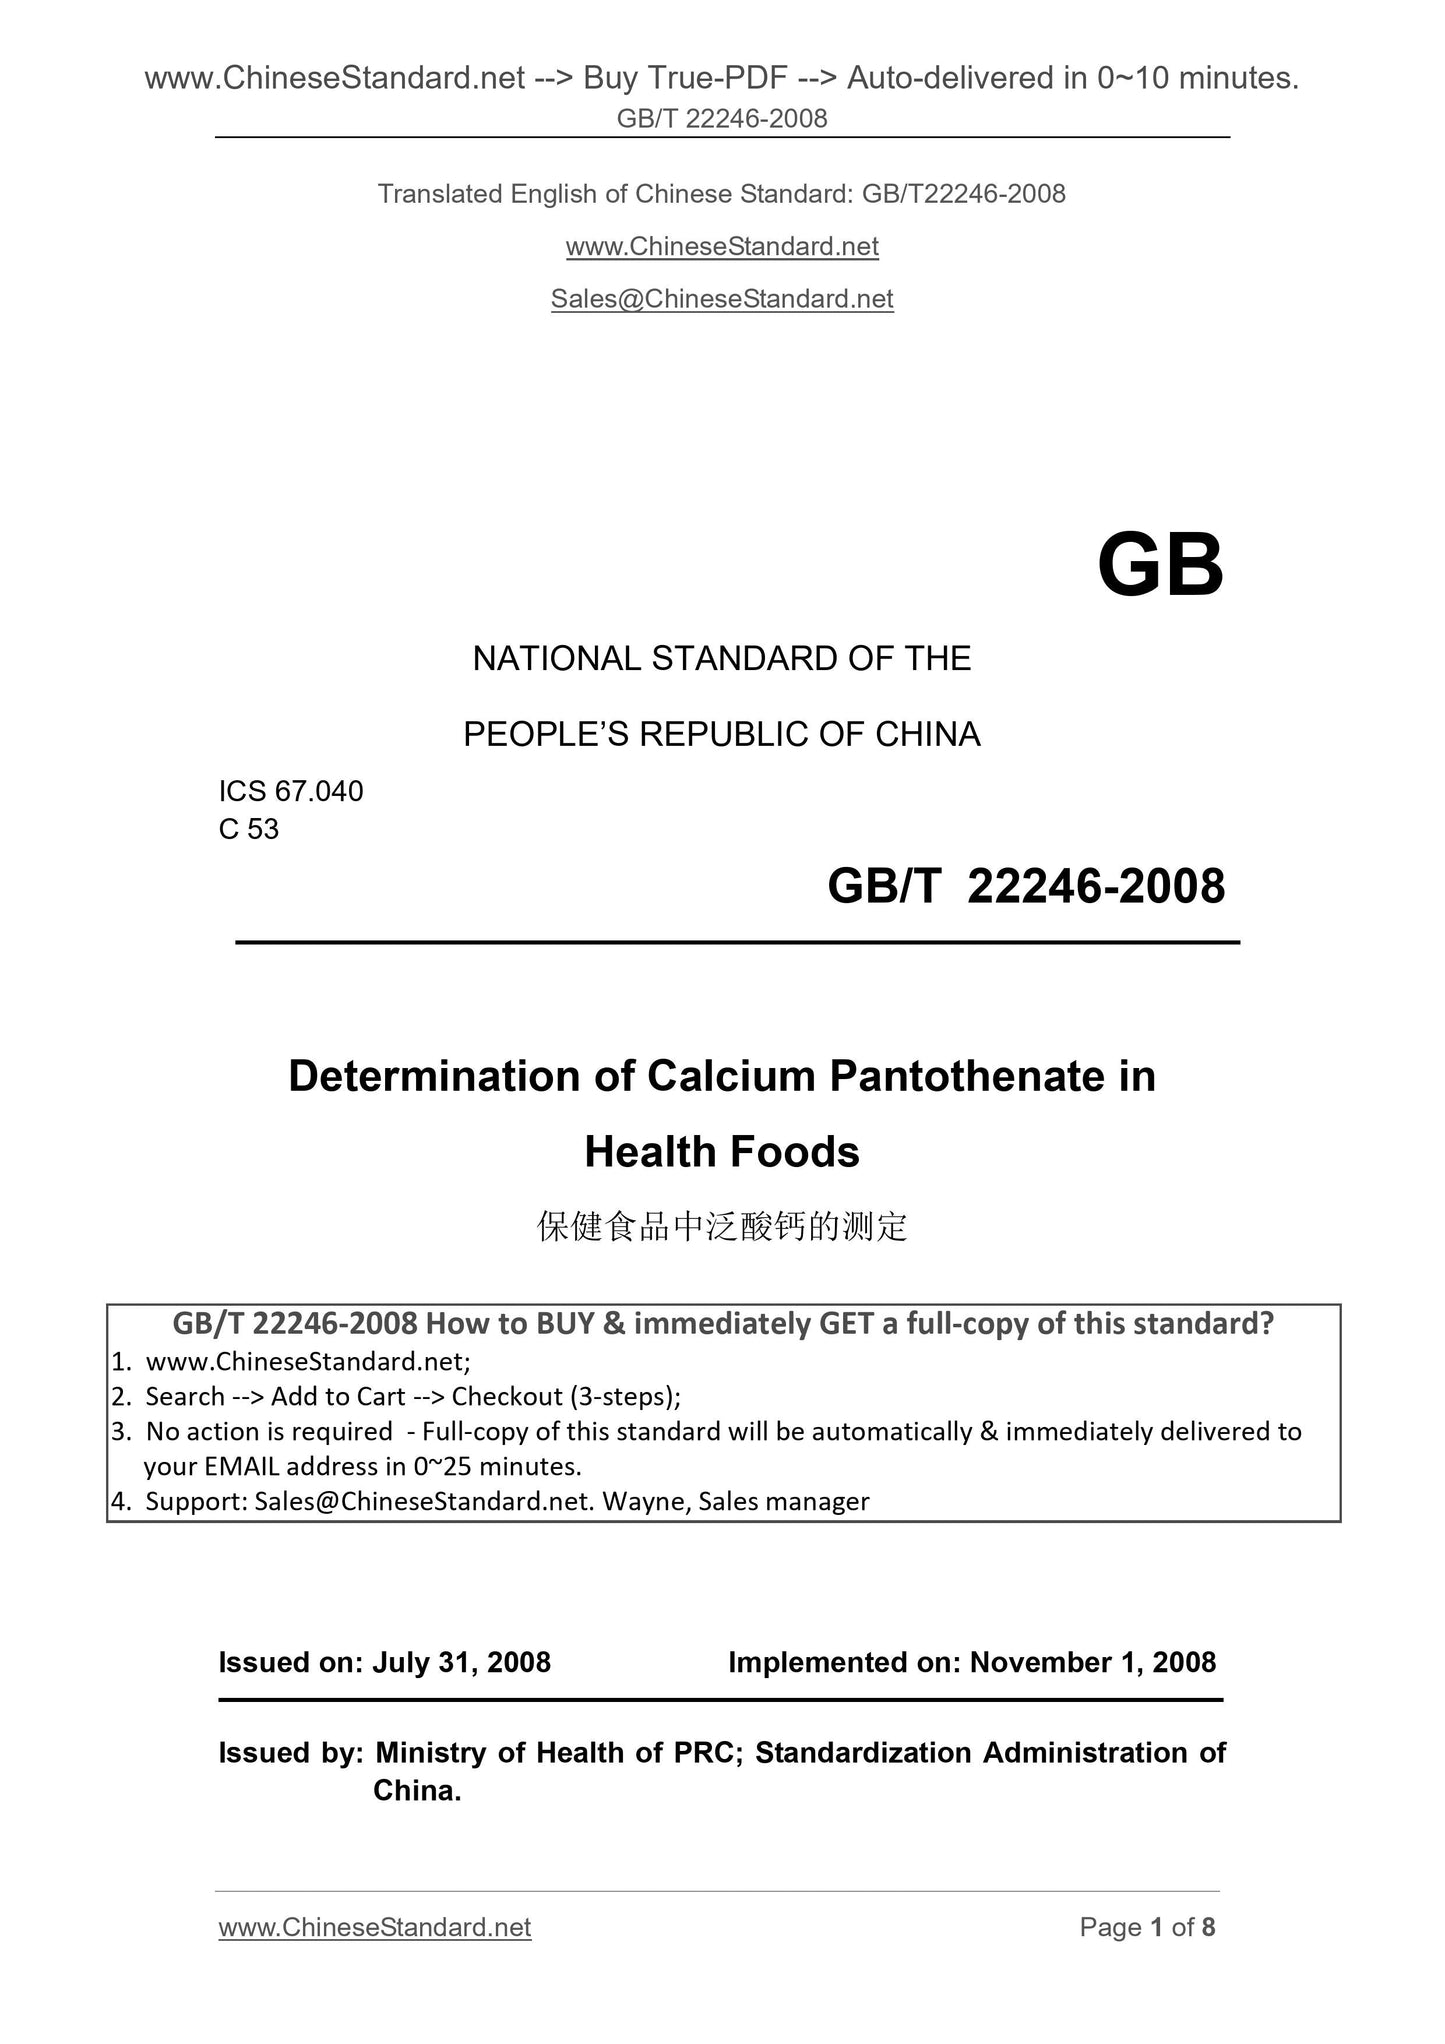 GB/T 22246-2008 Page 1